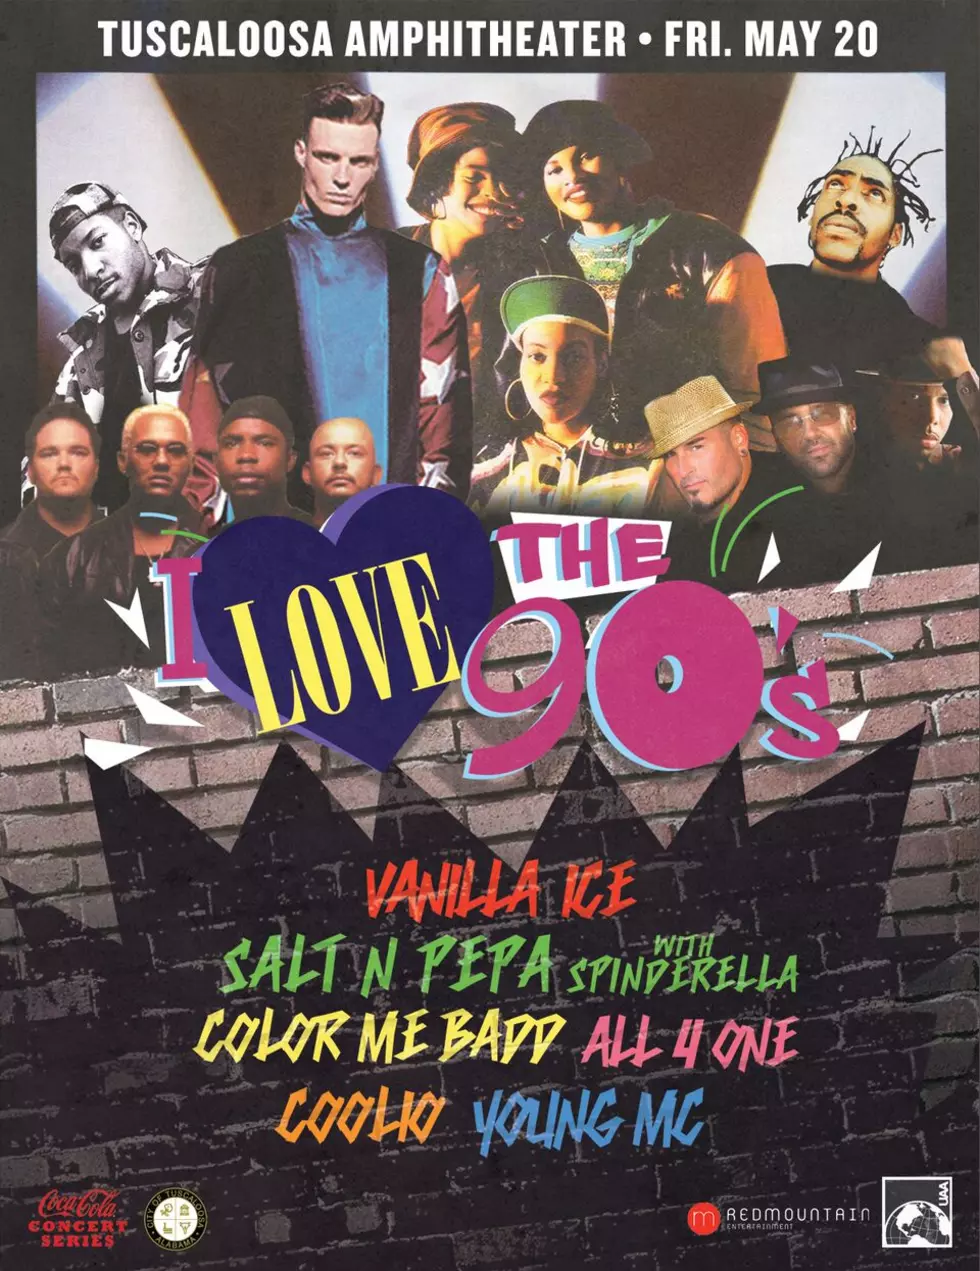 I Love The 90&#8217;s Tour Come To The Tuscaloosa Amphitheater Friday May 20